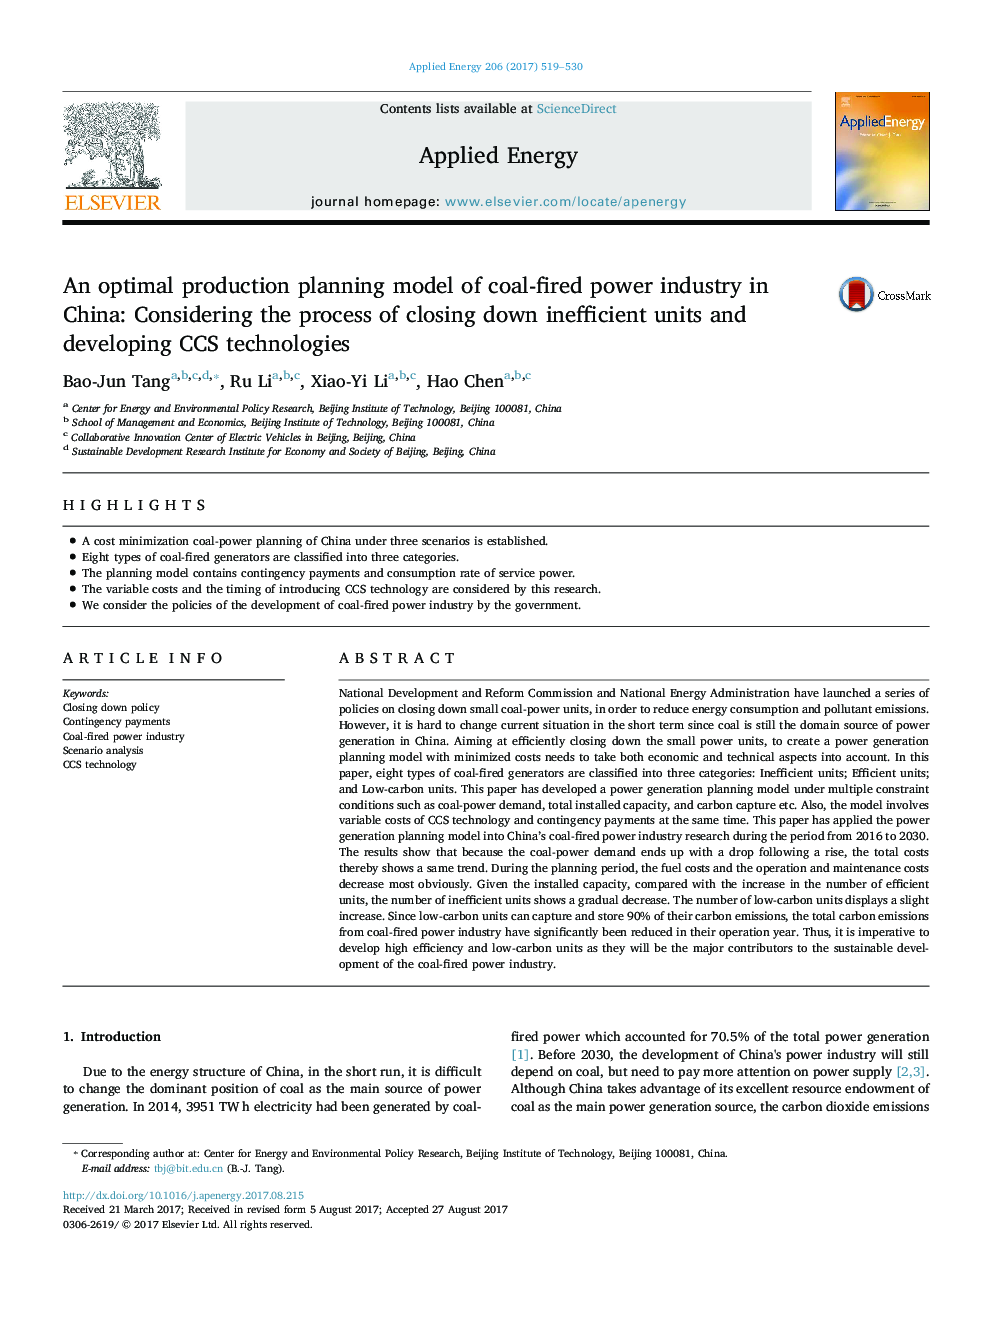 An optimal production planning model of coal-fired power industry in China: Considering the process of closing down inefficient units and developing CCS technologies